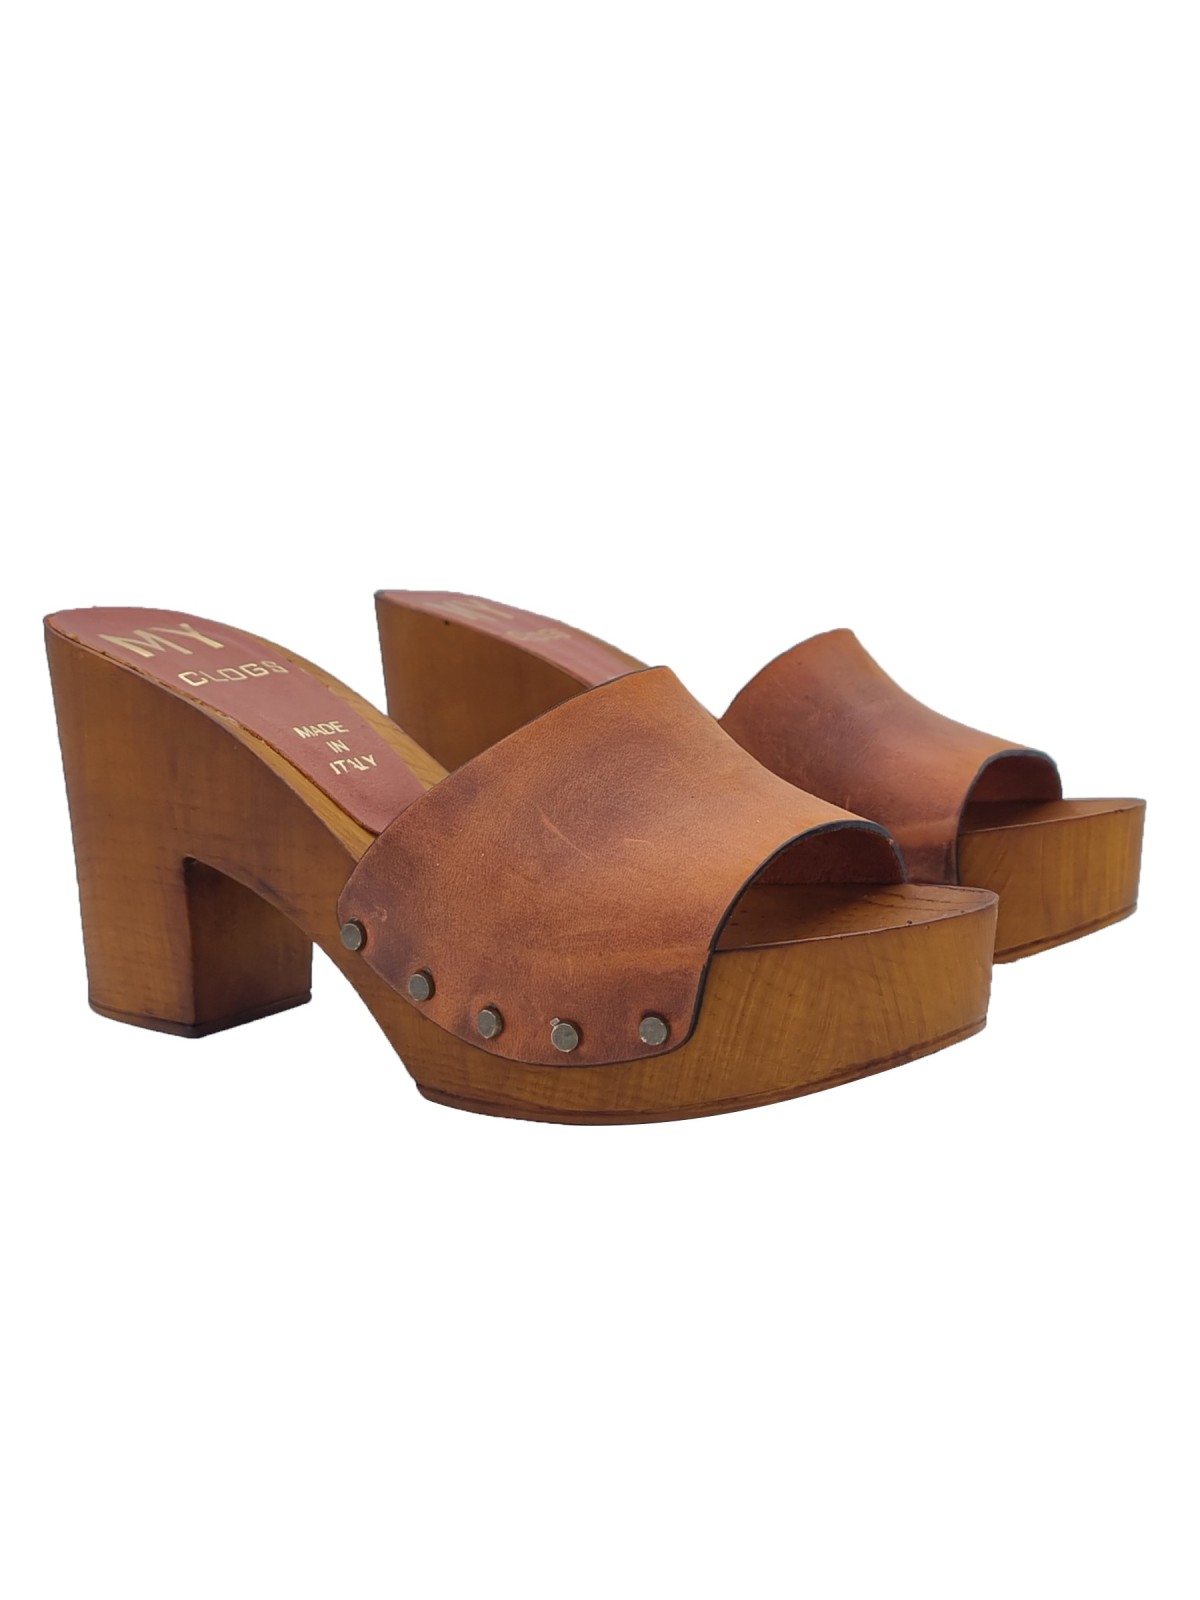 COMFORTABLE LEATHER-COLORED CLOGS